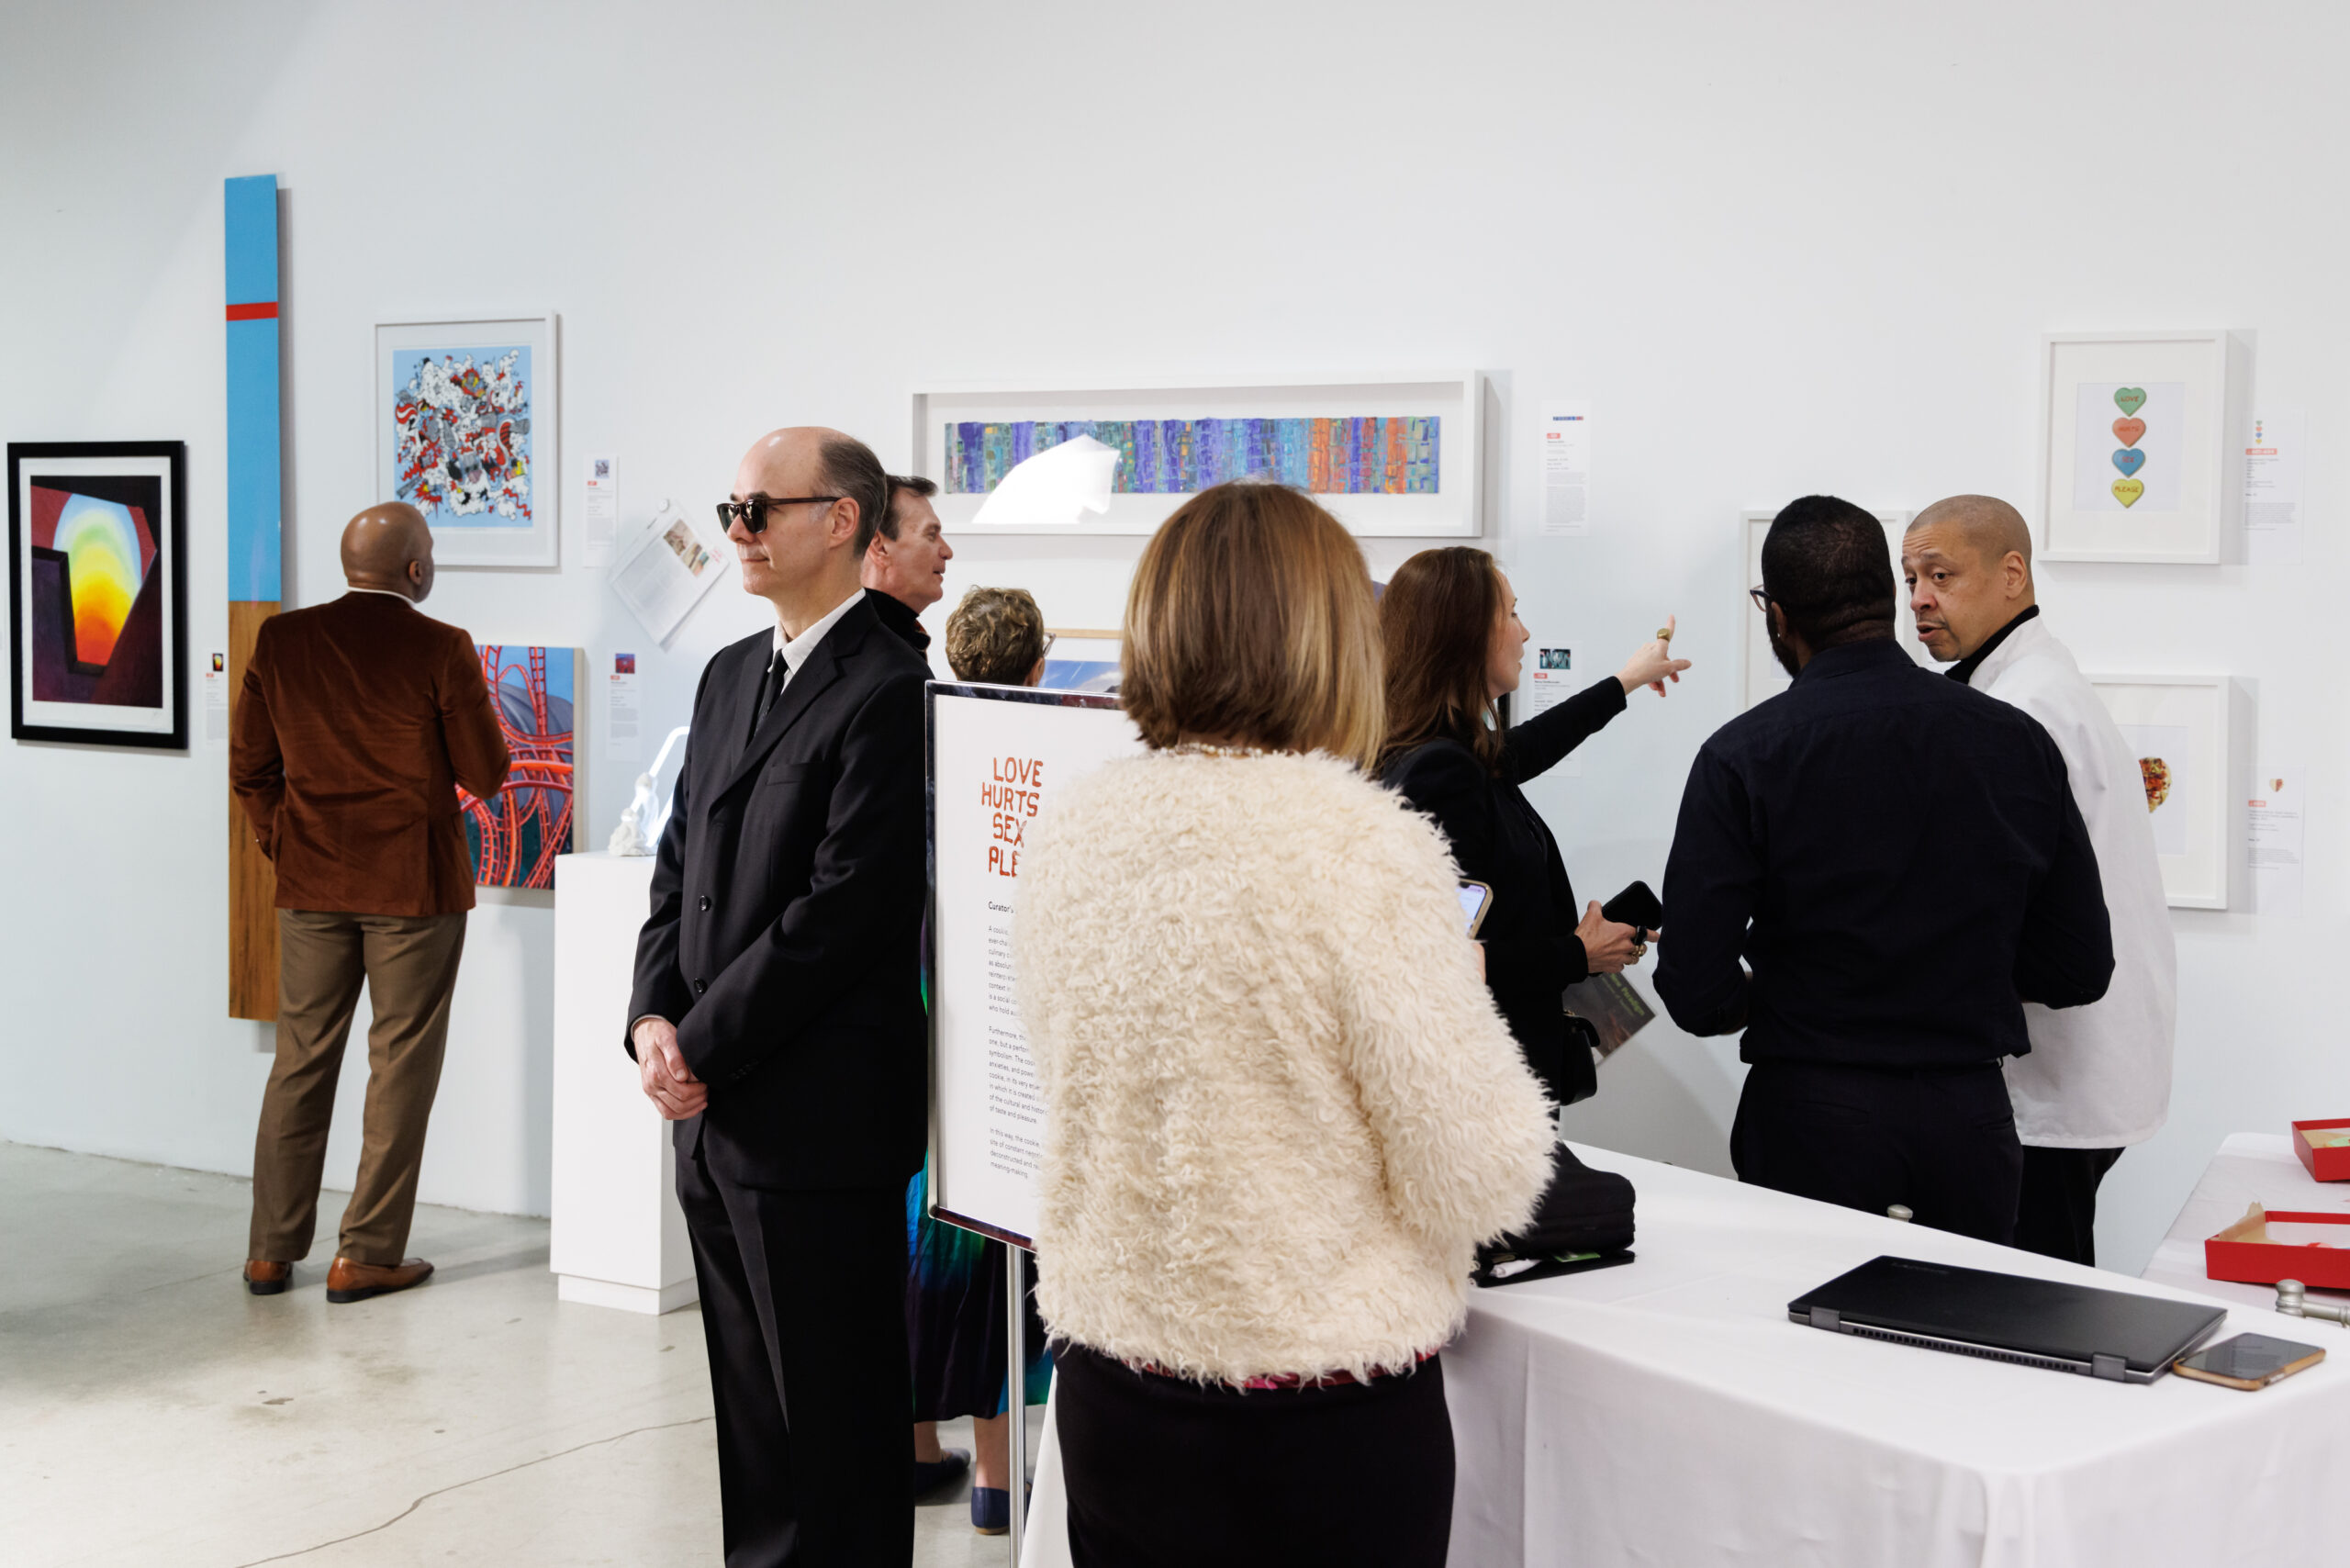 Image of a group of people gathering next to a wall of artwork.